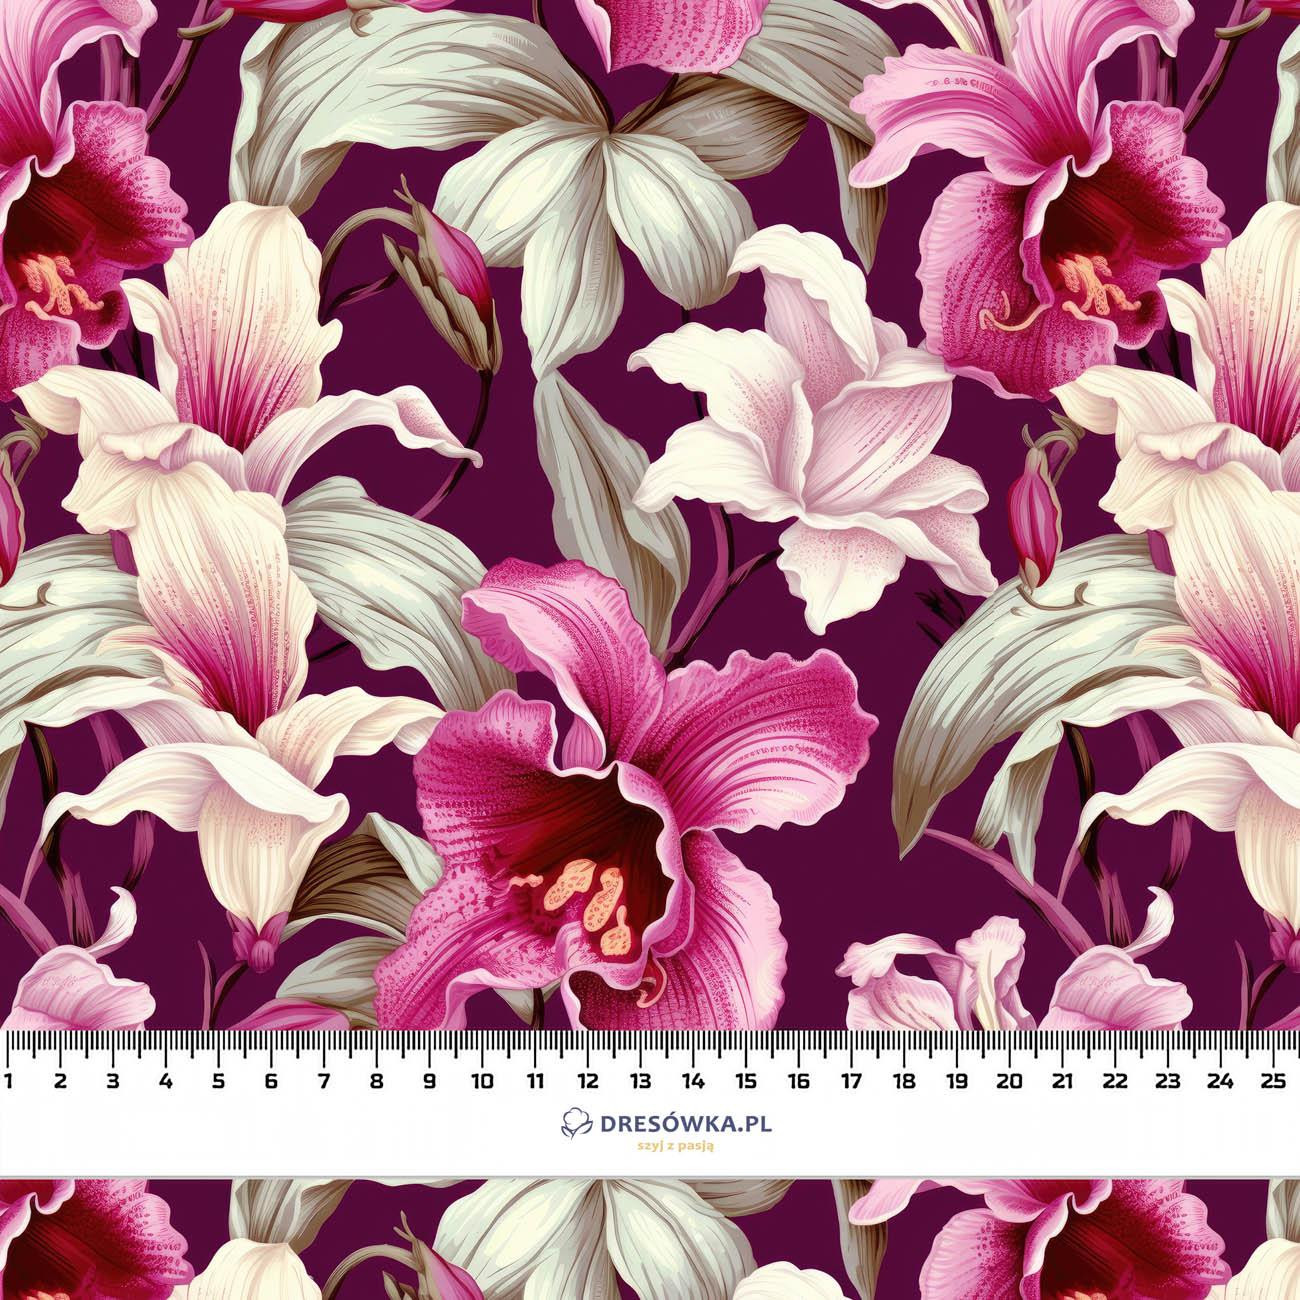 EXOTIC ORCHIDS MS. 8 - Satin